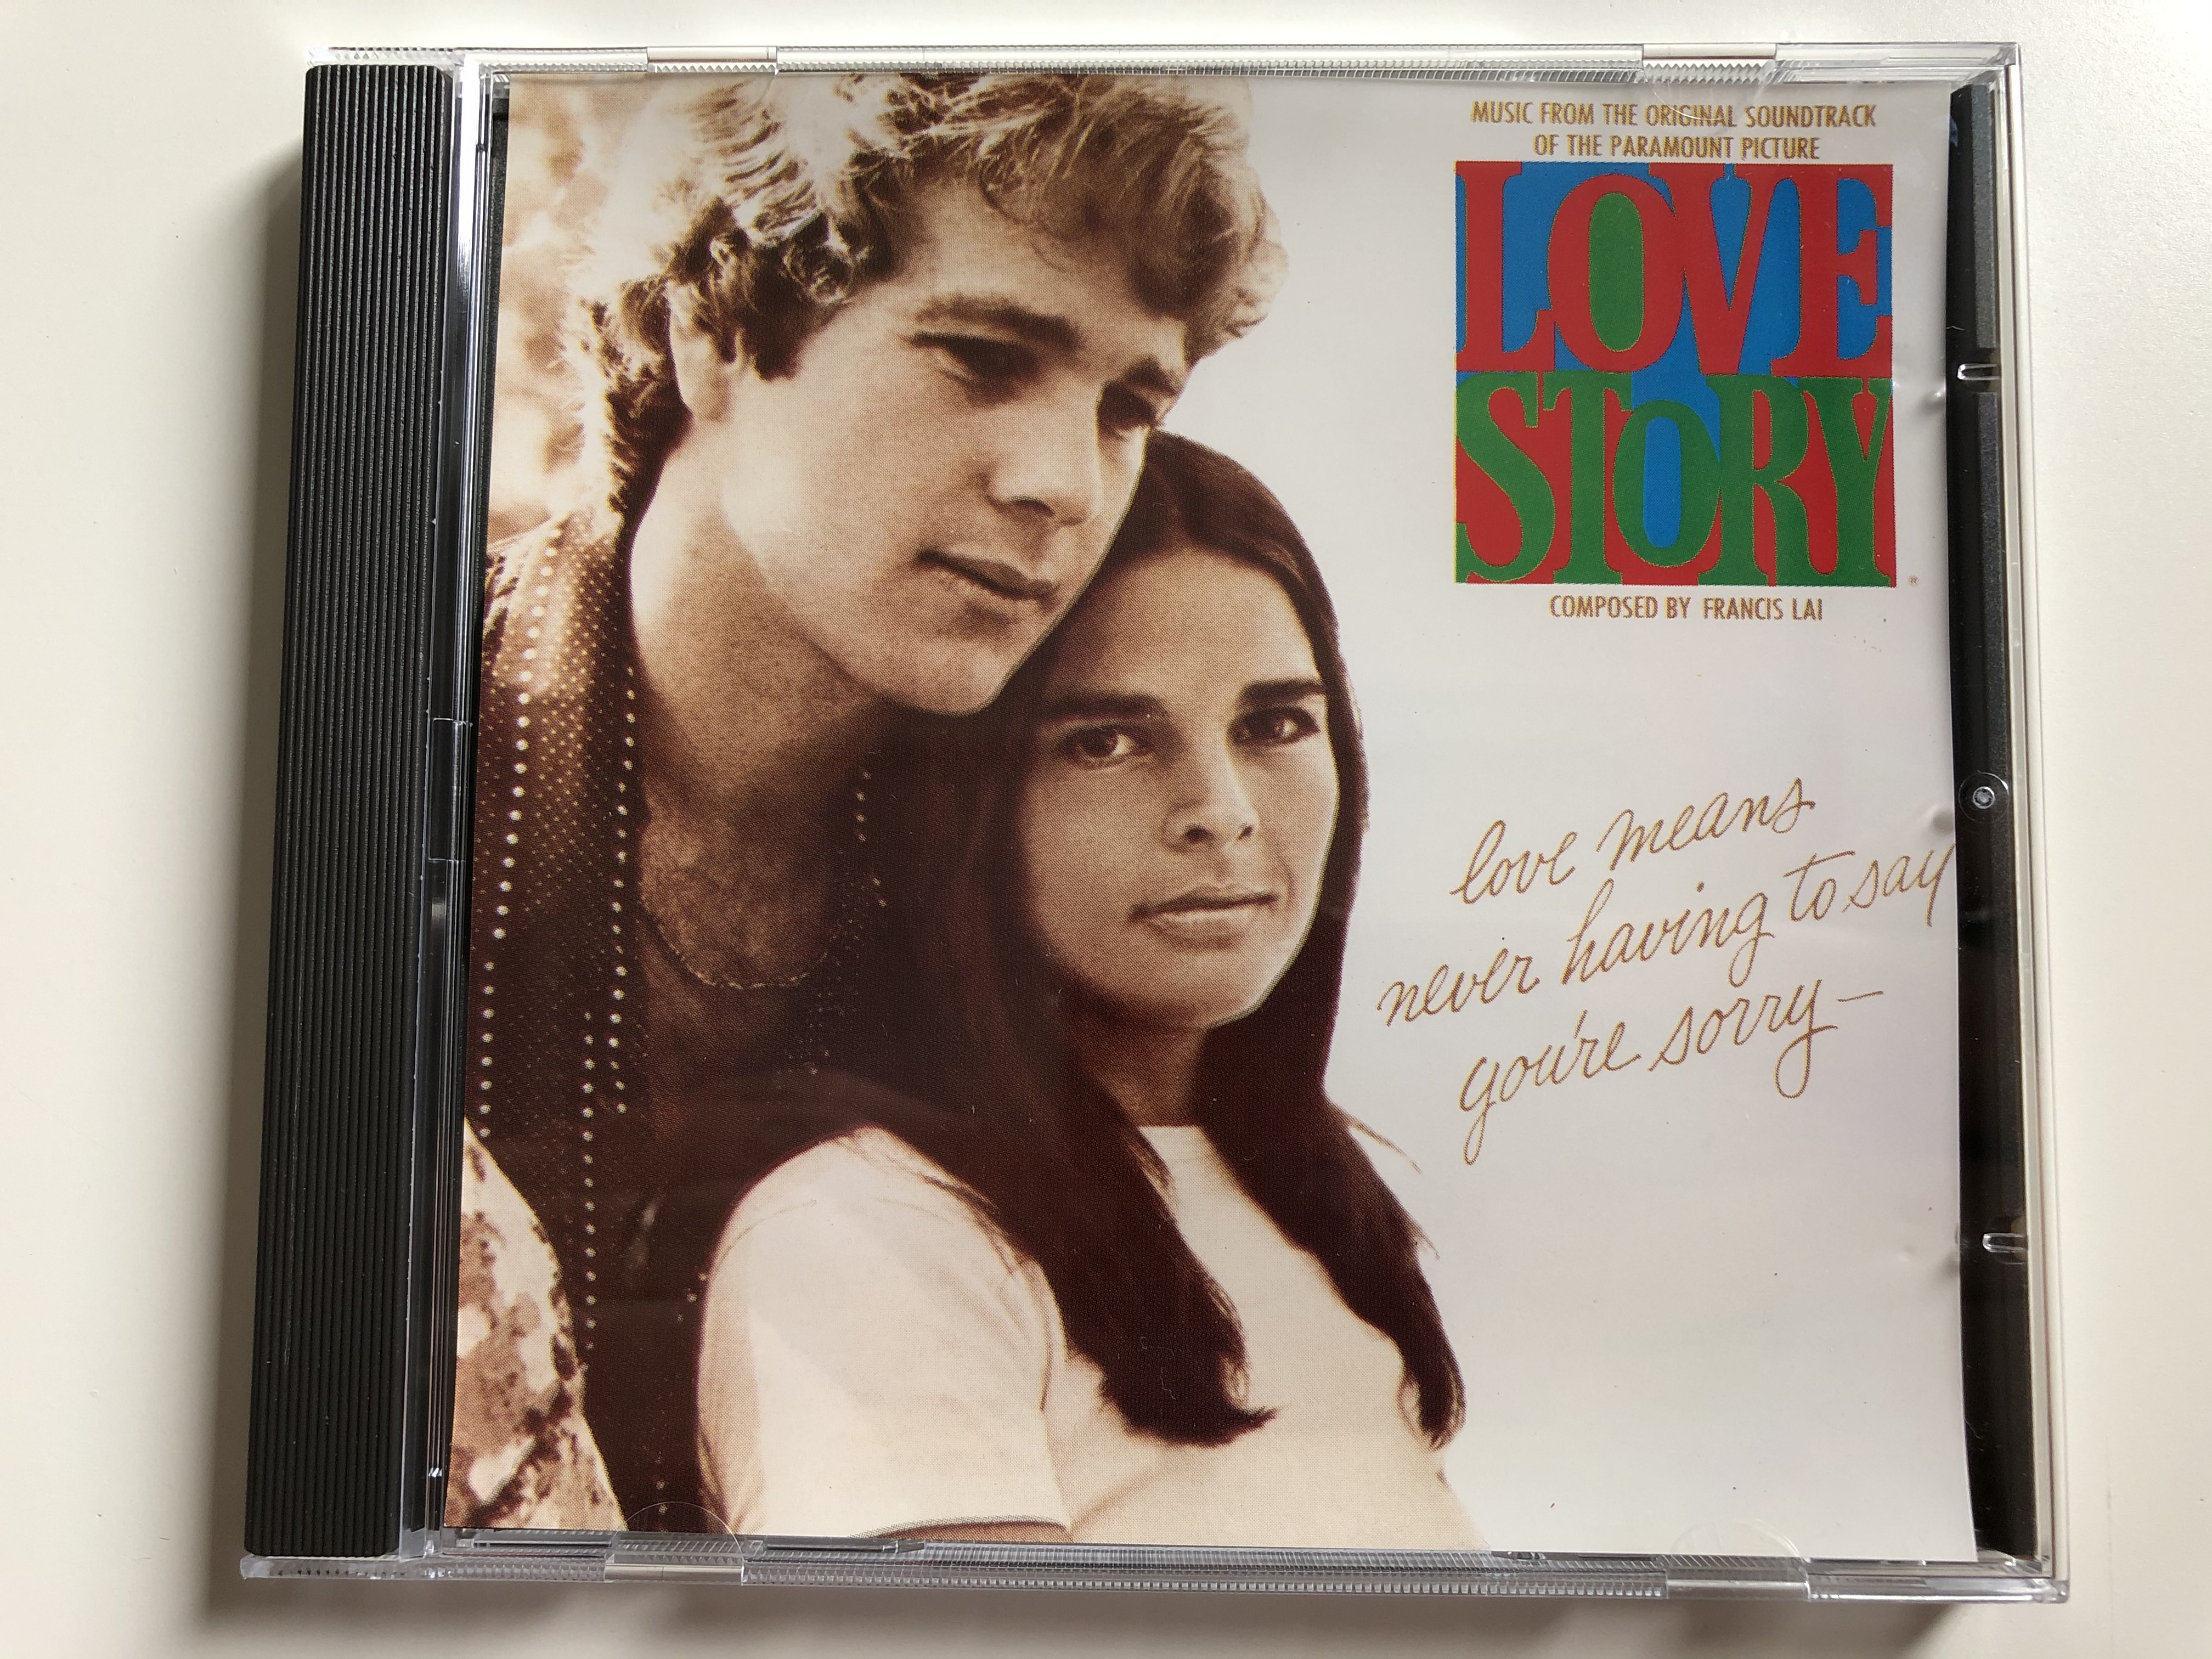 love-story-music-from-the-original-soundtrack-composed-by-francis-lai-mca-records-audio-cd-mcd-27017-1-.jpg